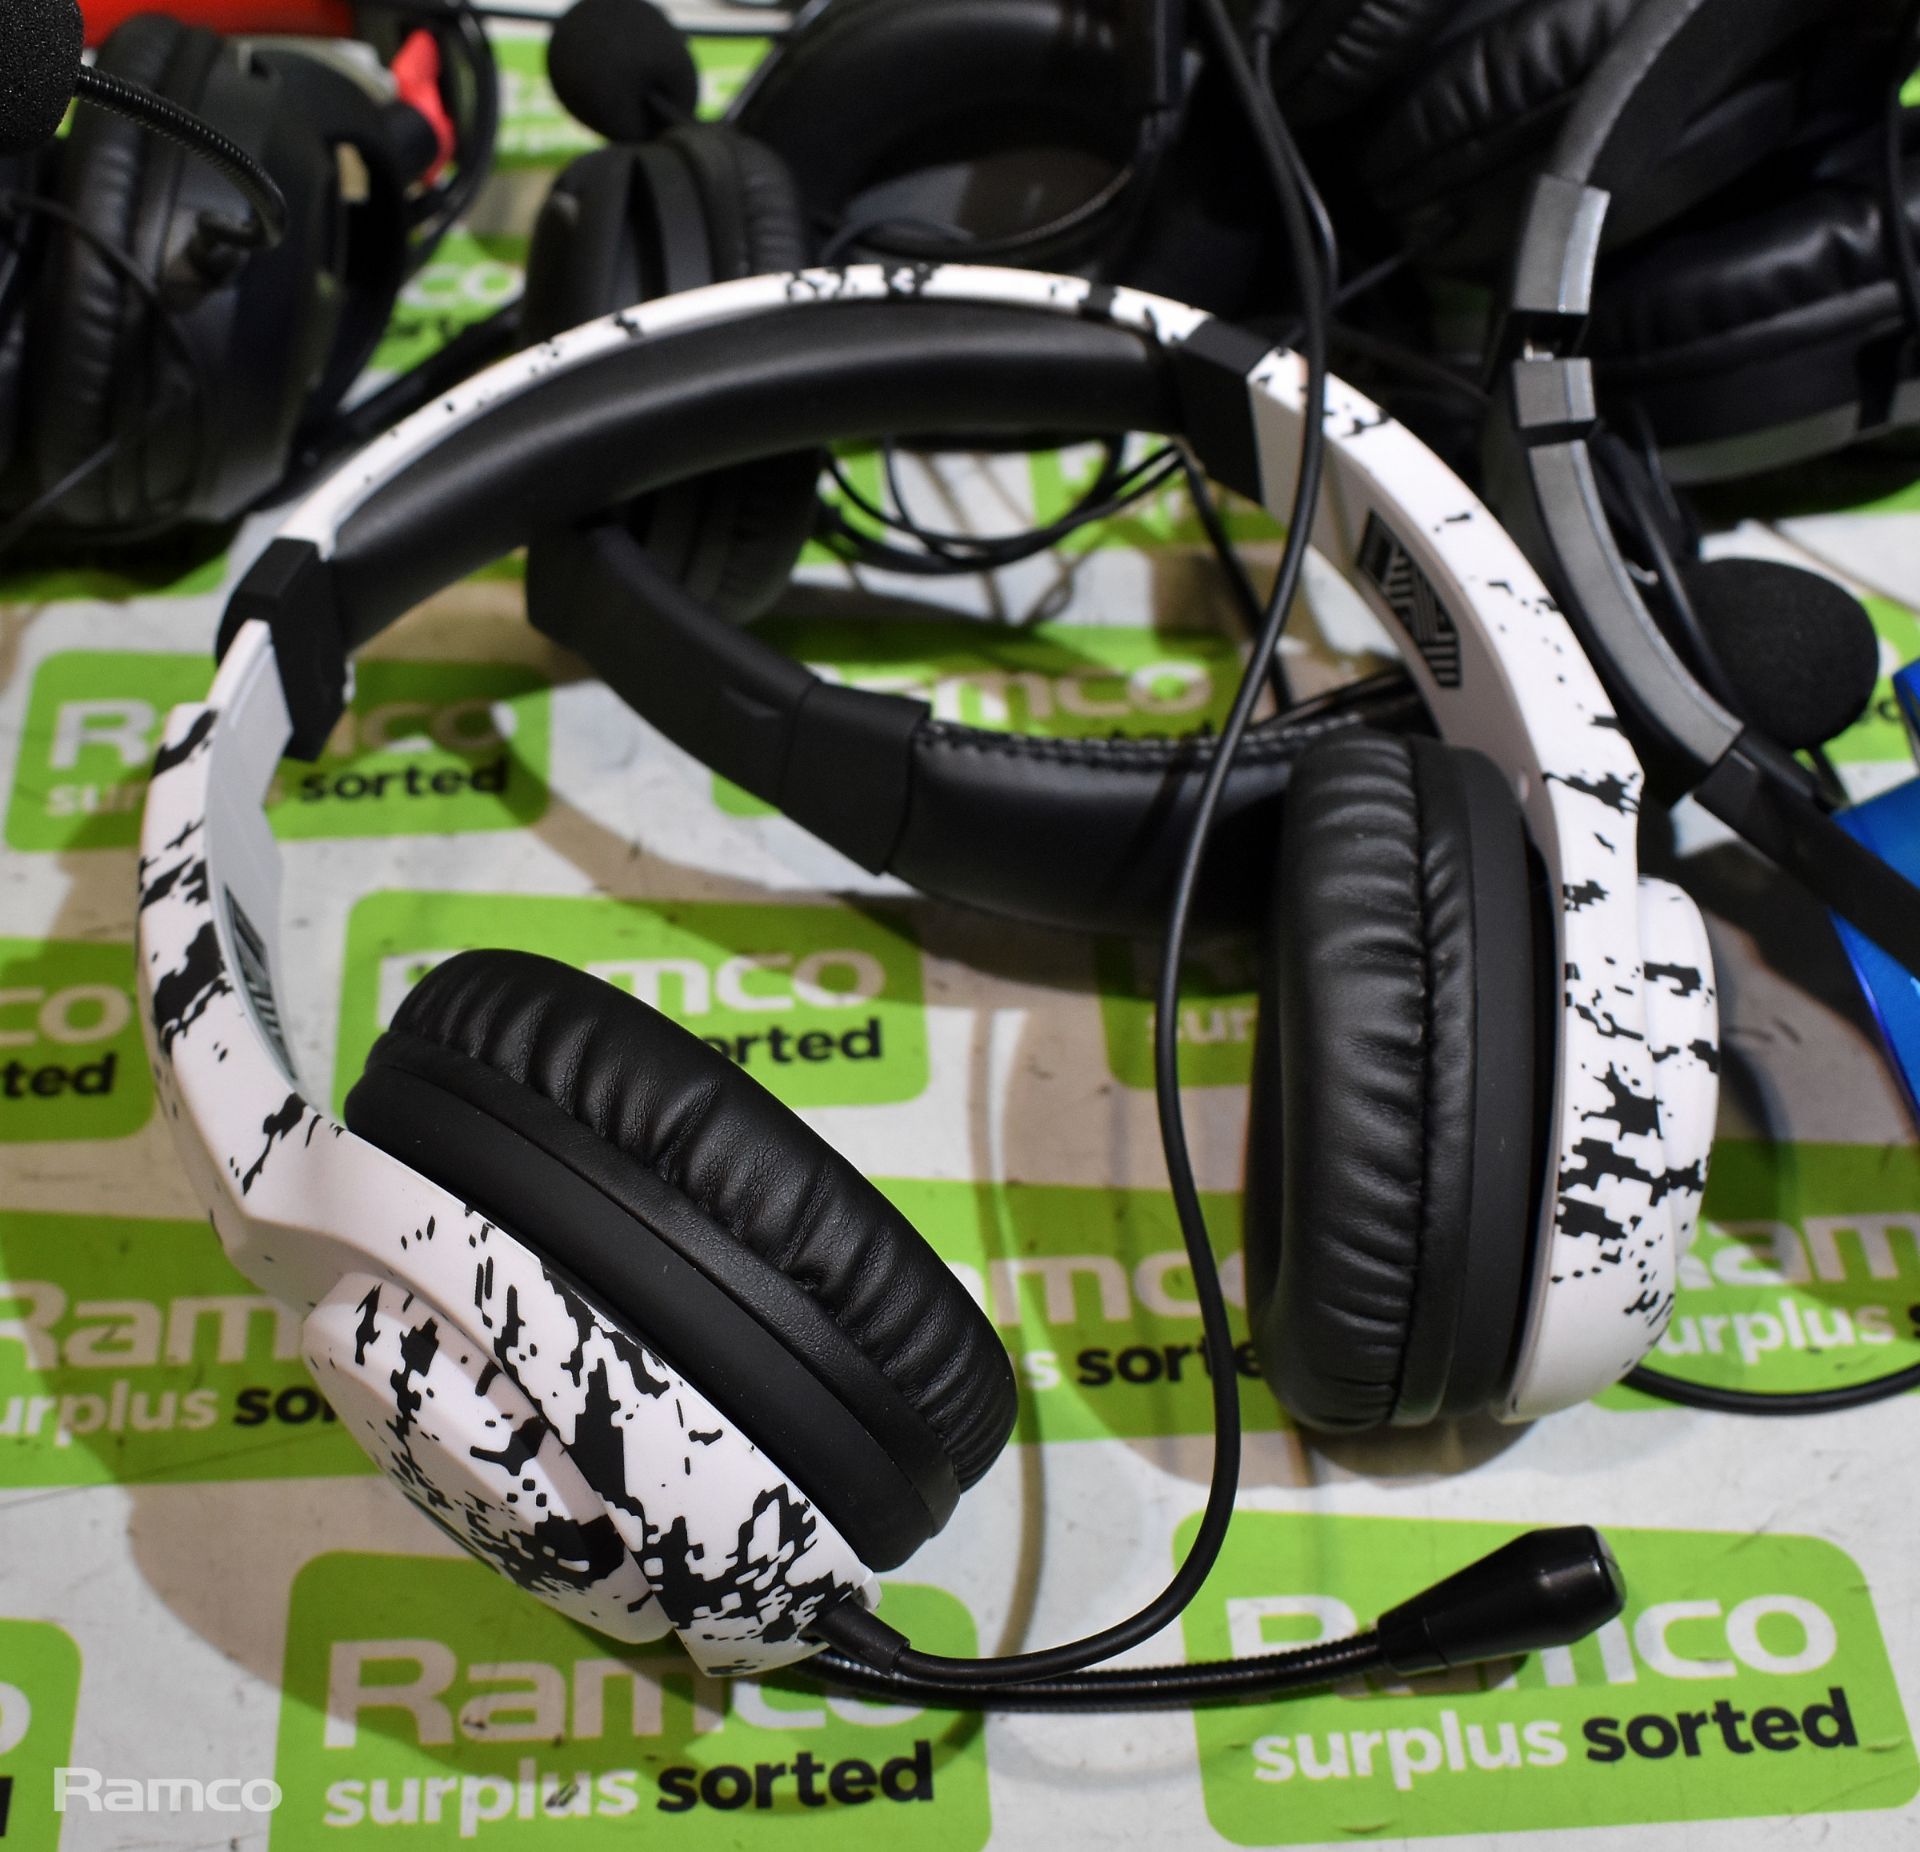 7x Multiple type/make gaming headsets - unboxed, - Image 2 of 5